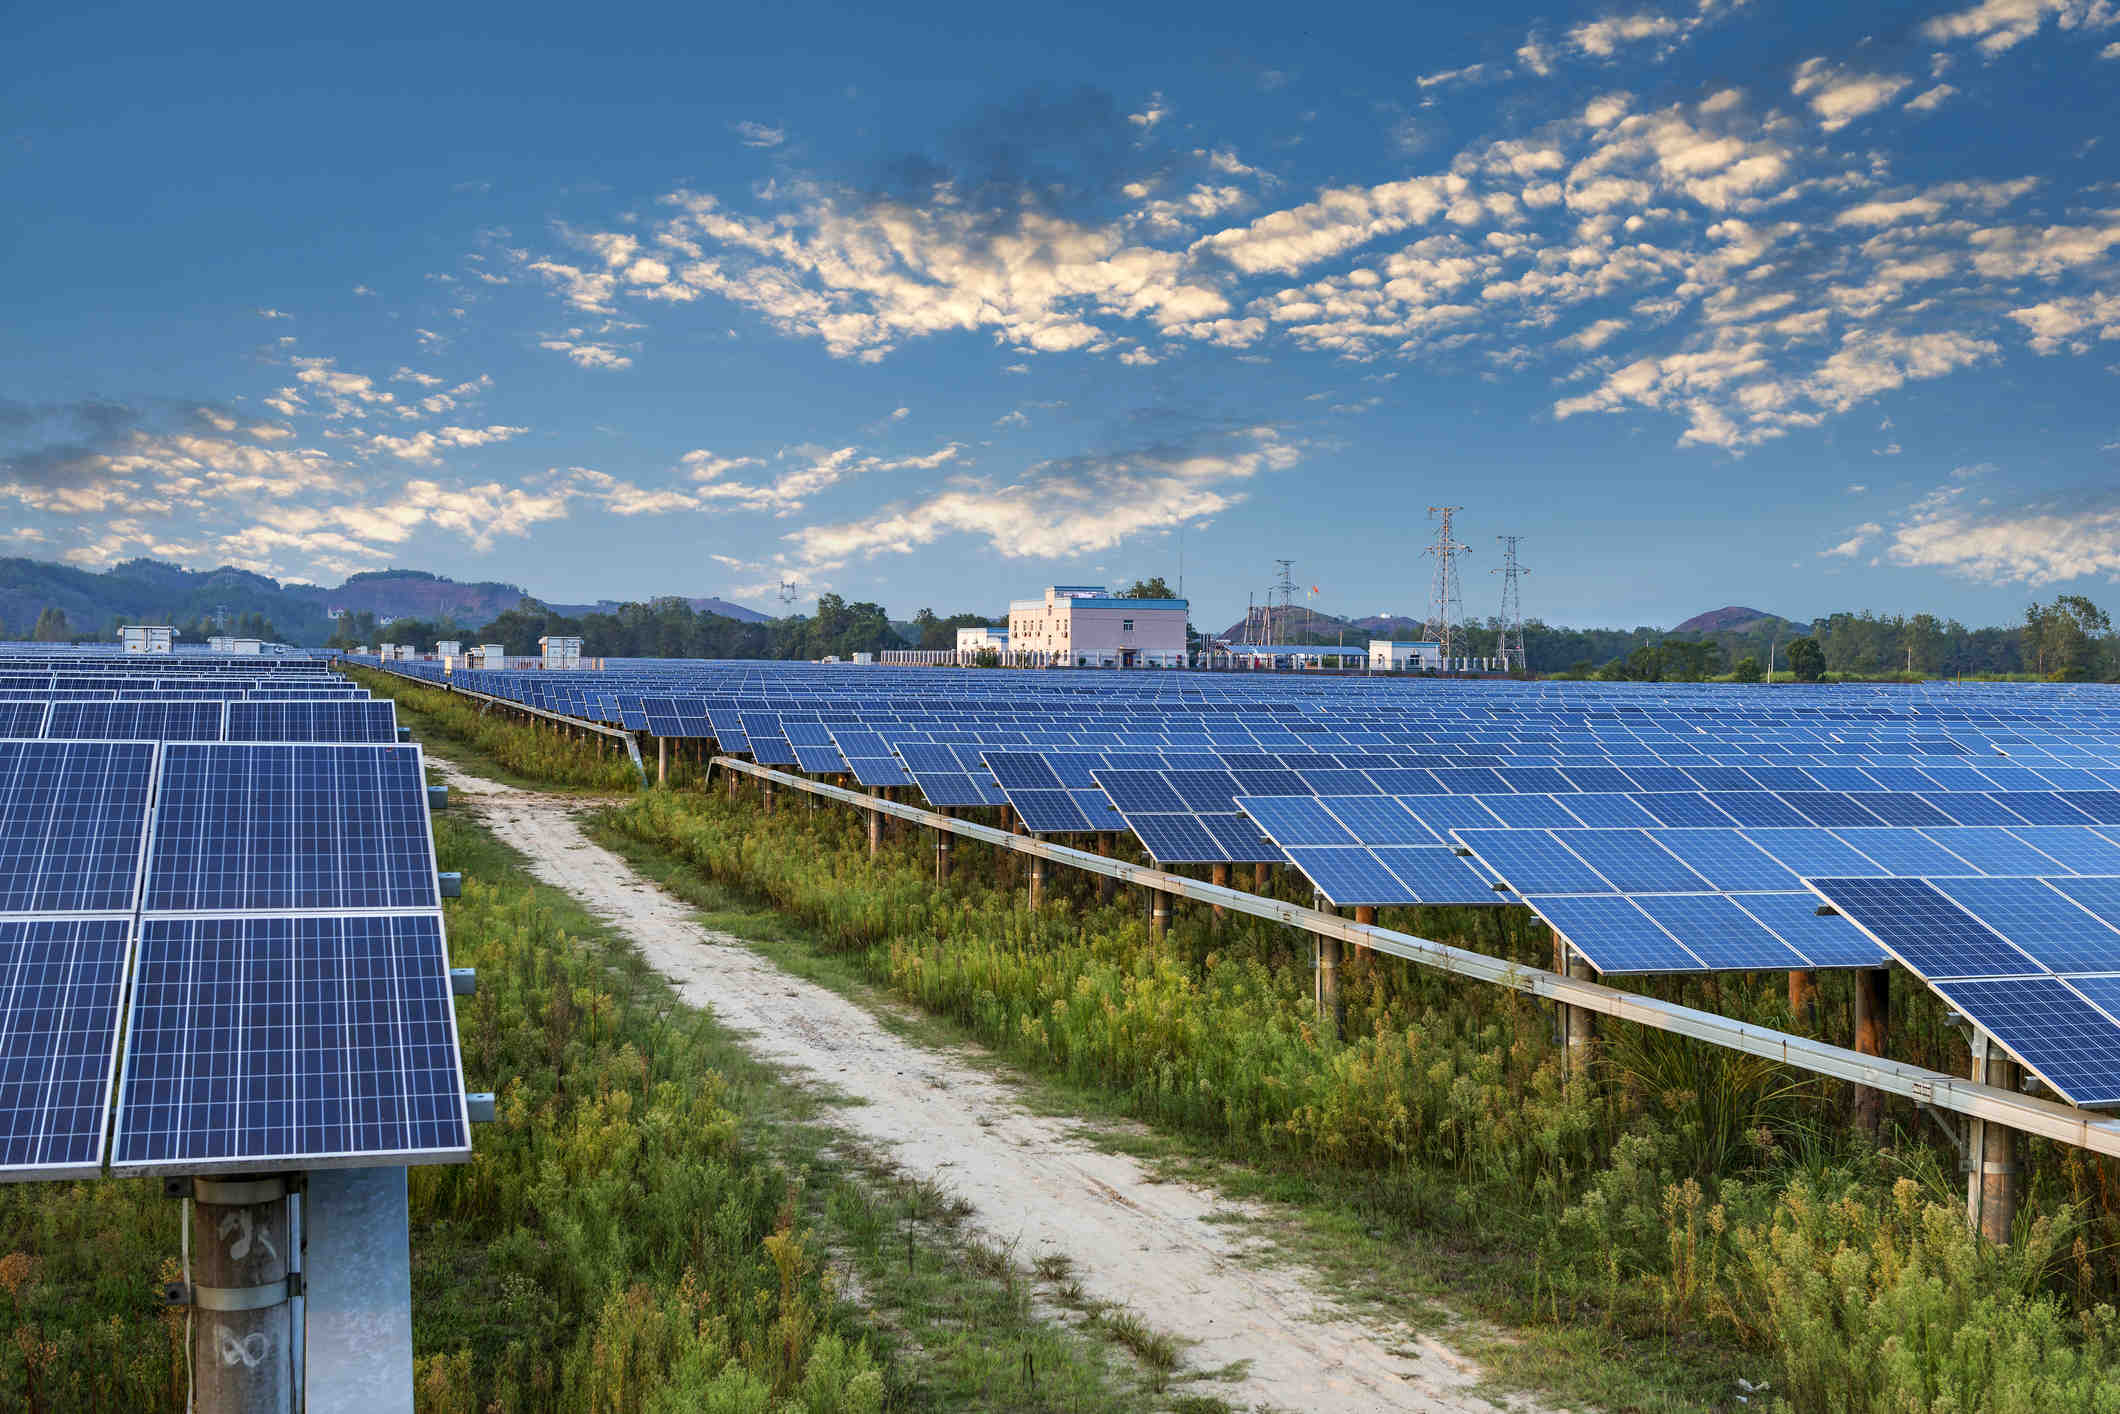 What type of solar panels do solar farms use?